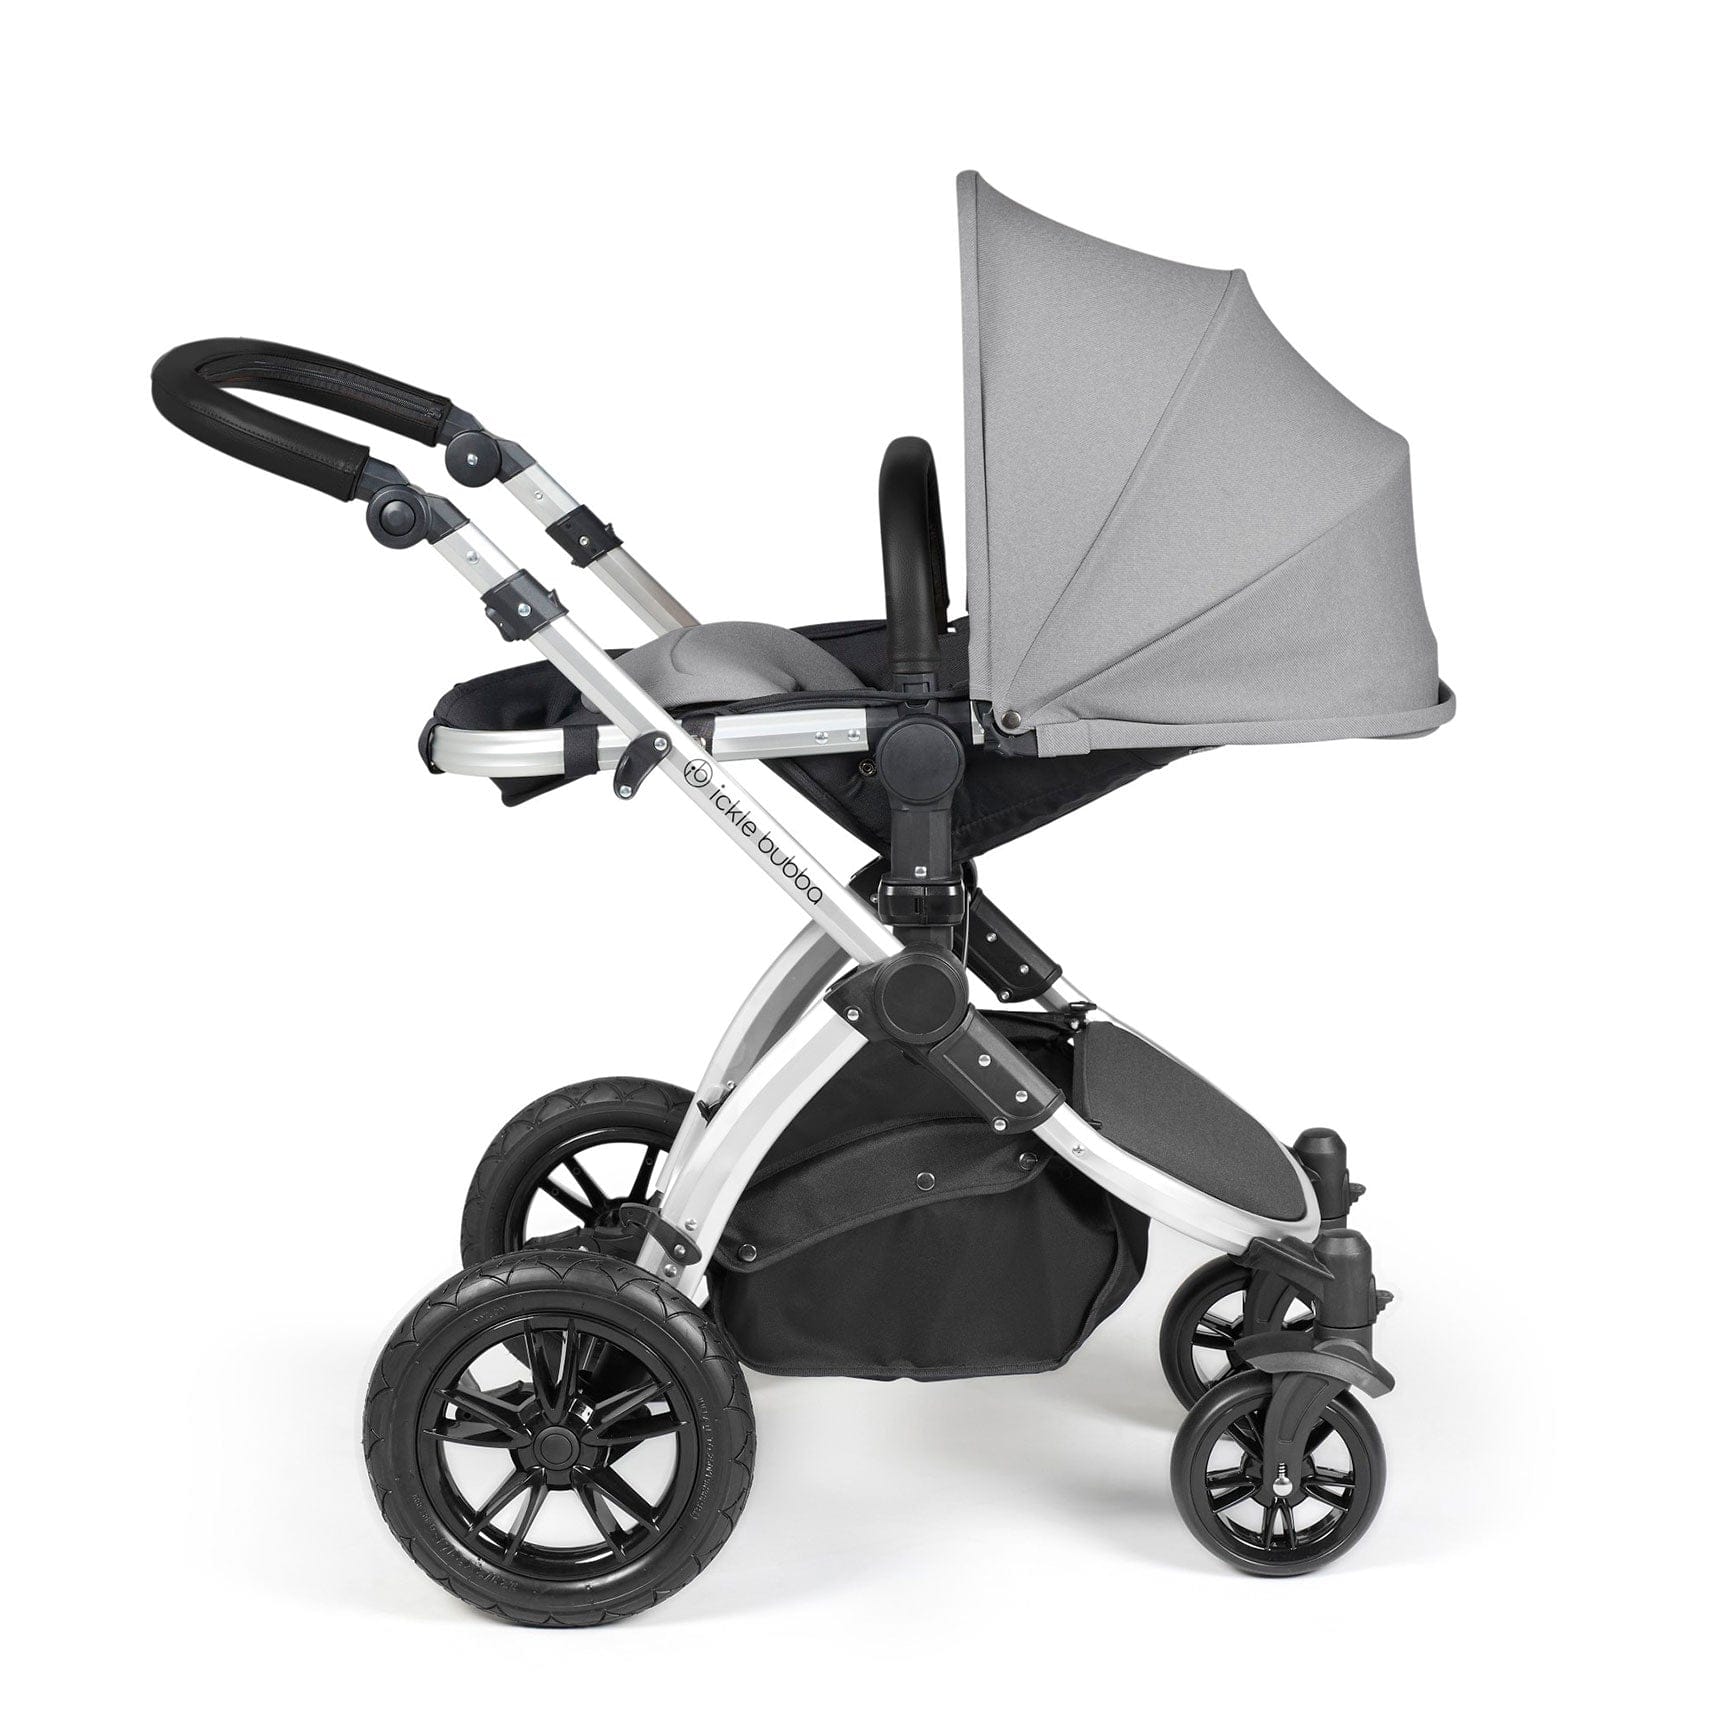 Ickle Bubba travel systems Ickle Bubba Stomp Luxe All-in-One Travel System with Isofix Base - Silver/Pearl Grey/Black 10-011-300-259